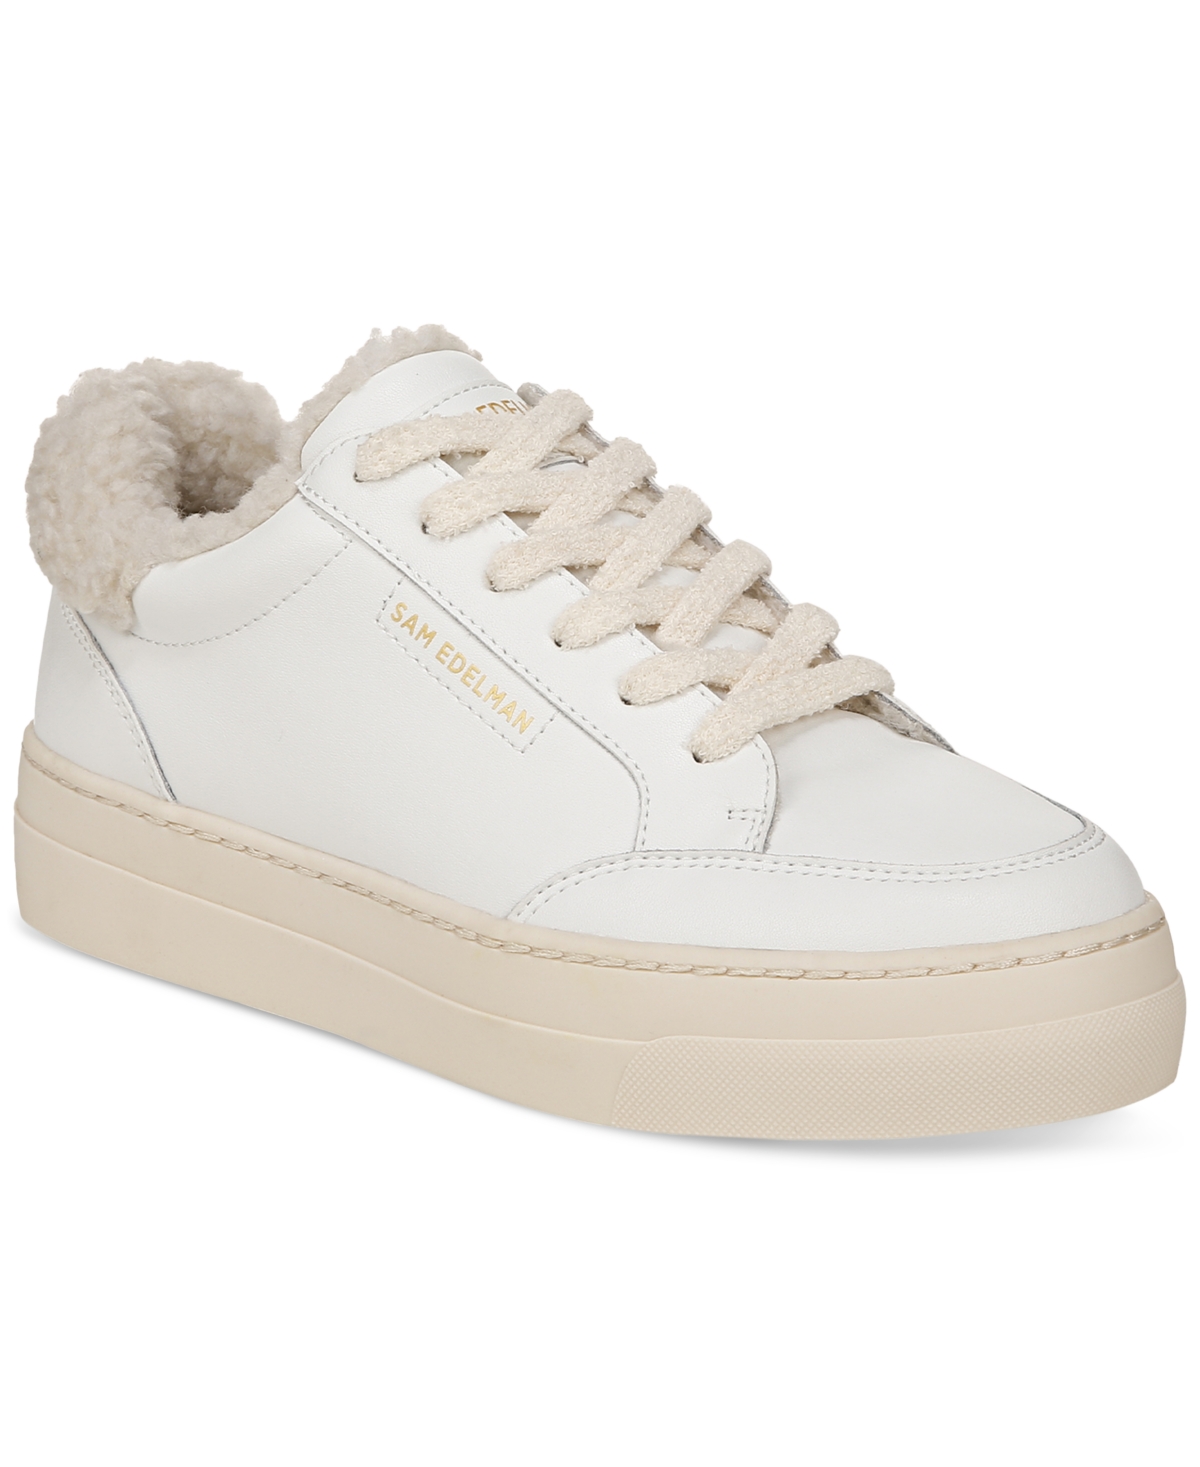 Women's Wess Cozy Lace-Up Low-Top Sneakers - Bright White